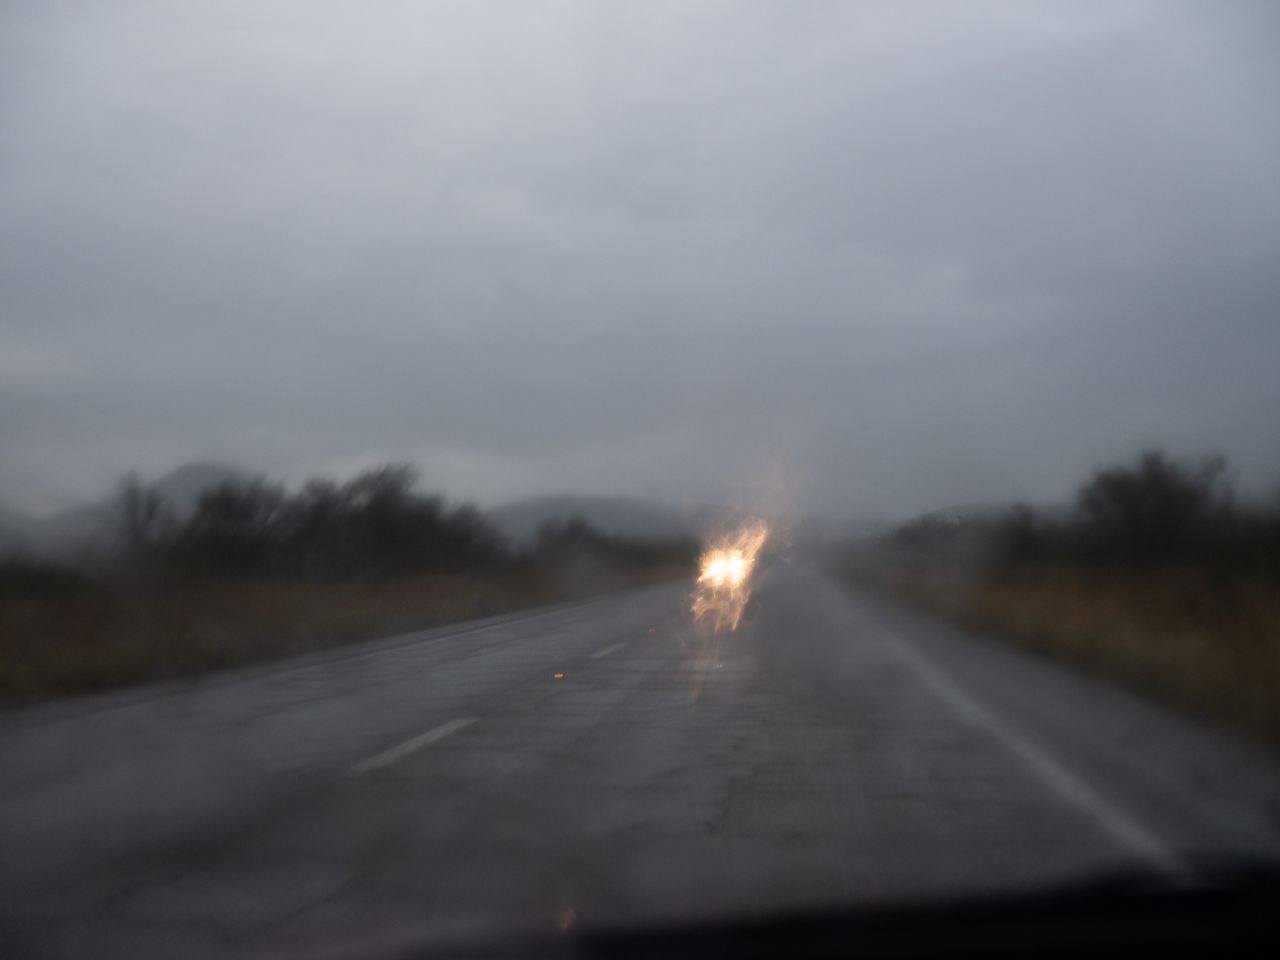 Approaching headlights blur in the rainfall between Bisbee and Tombstone.